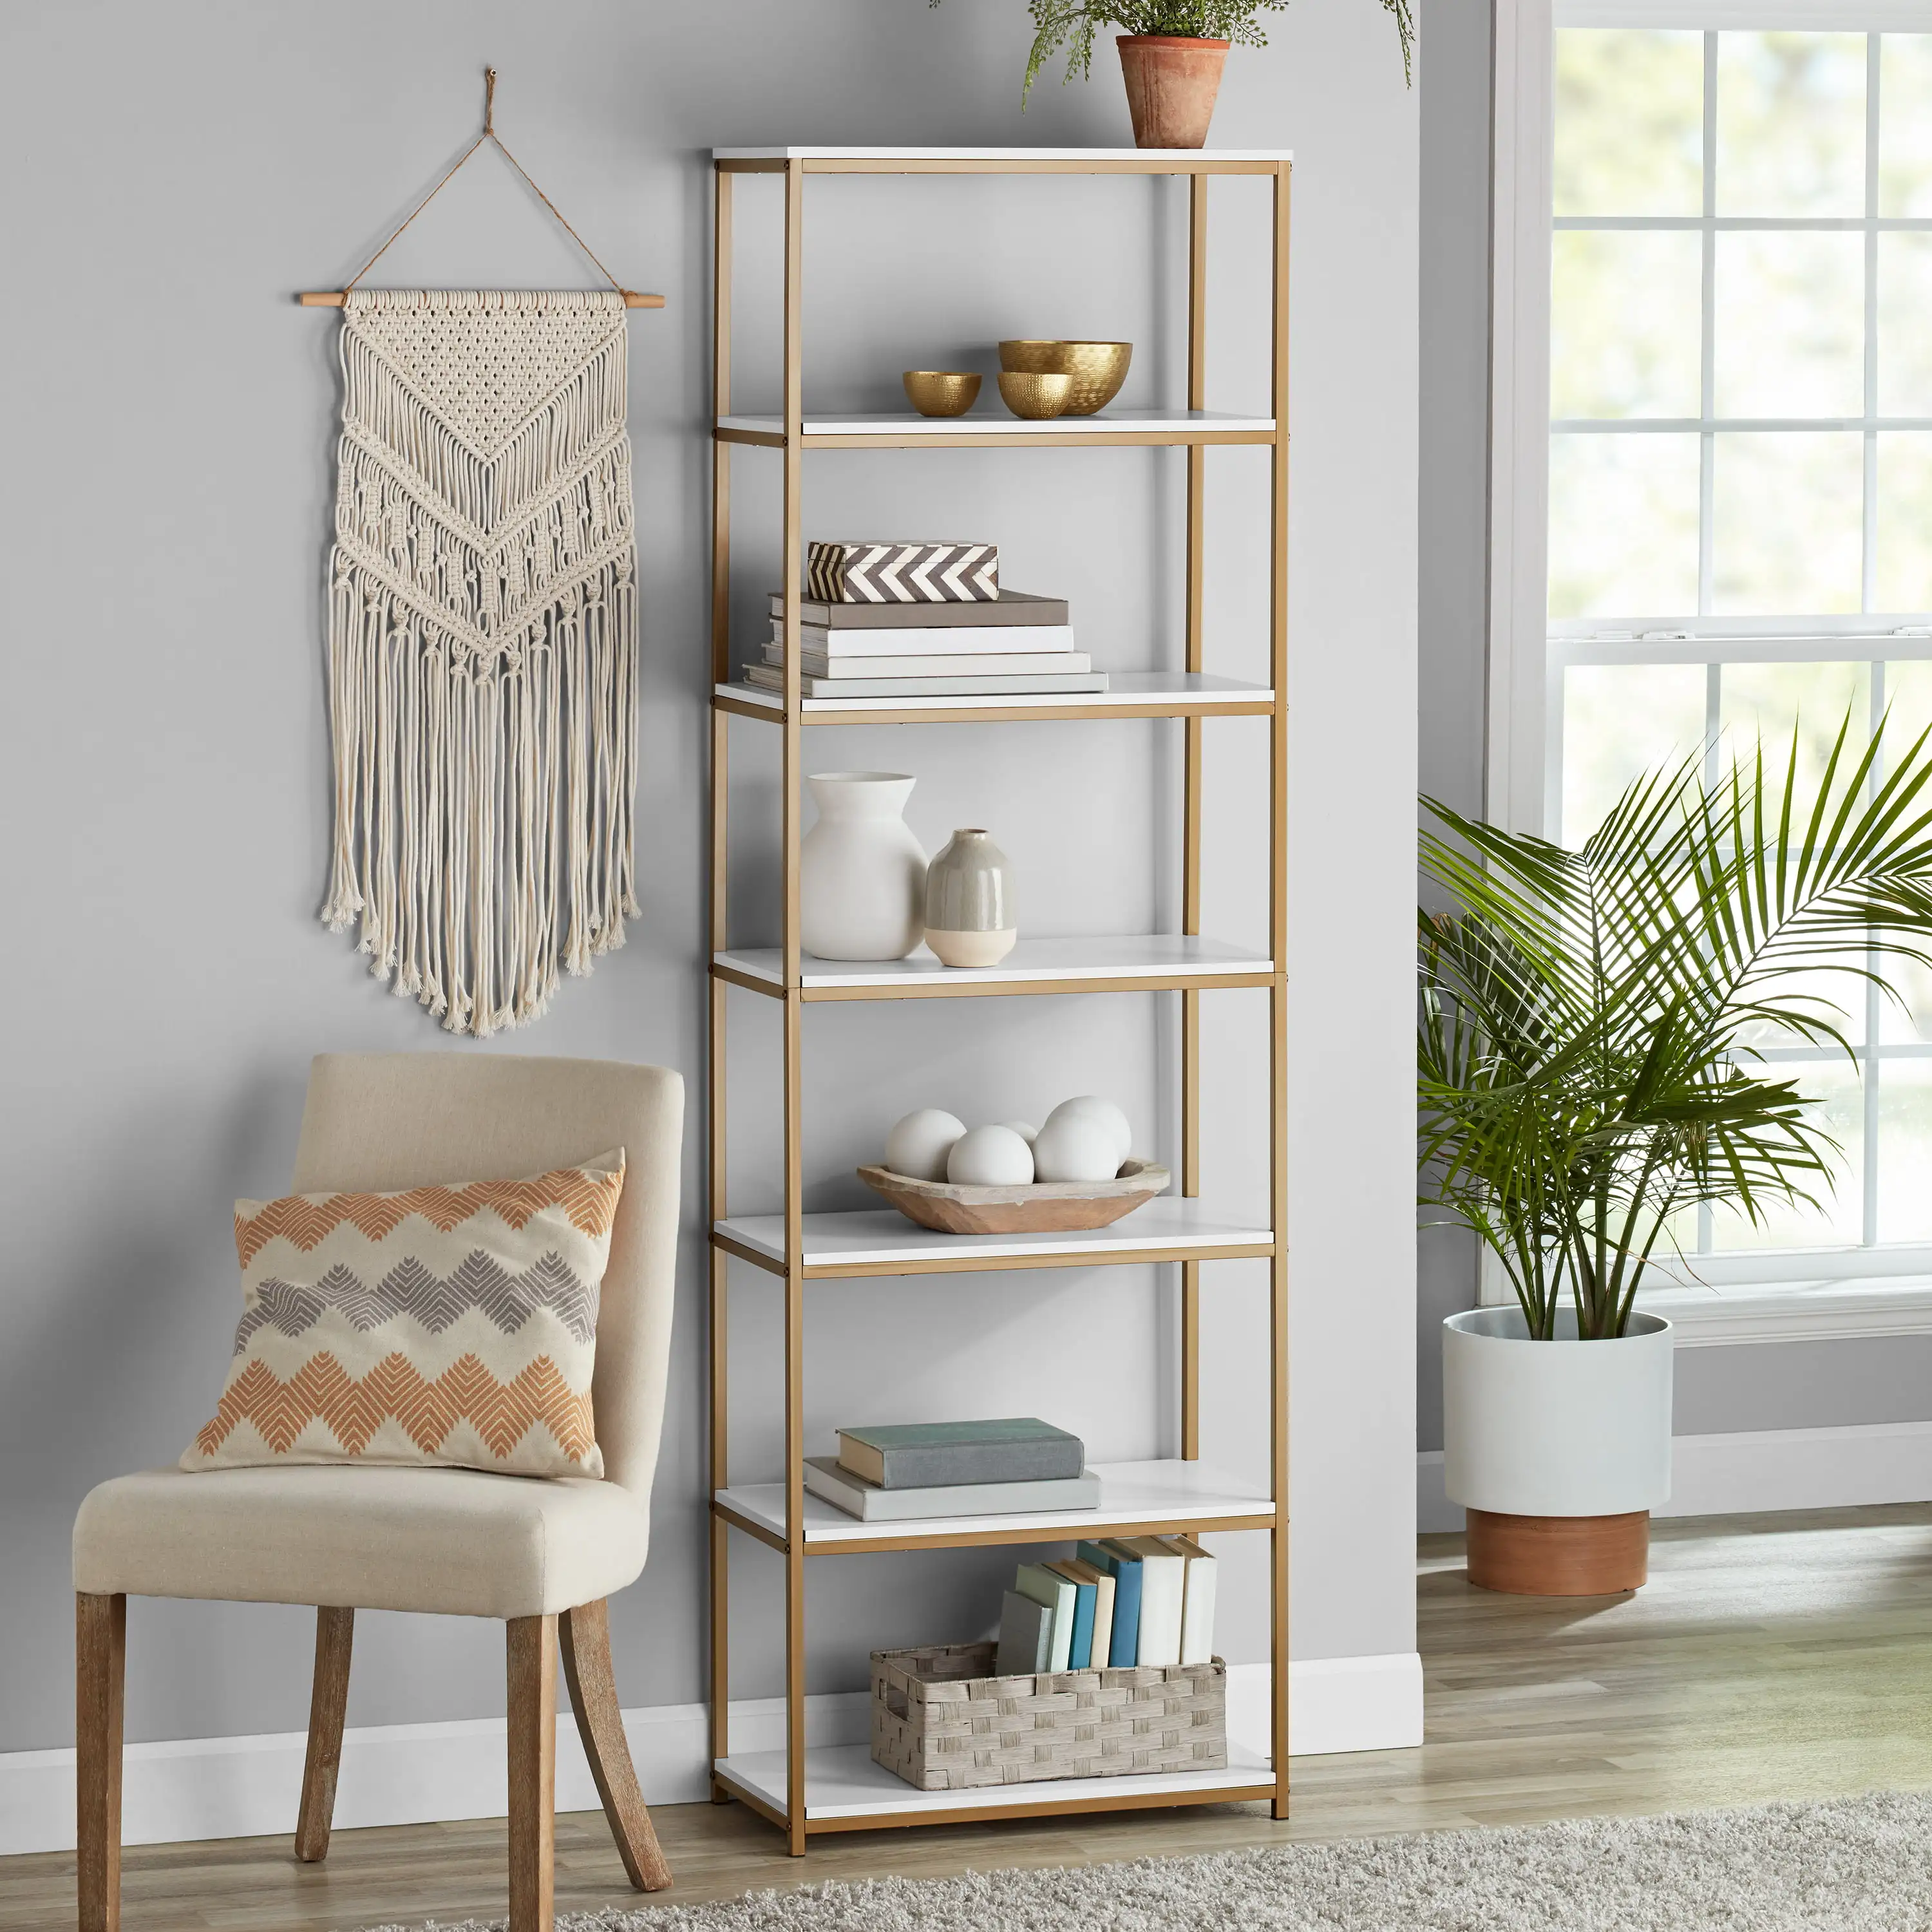 6-Shelf Metal Frame Bookcase, Open Shelves, For Storage And Display (US Stock)